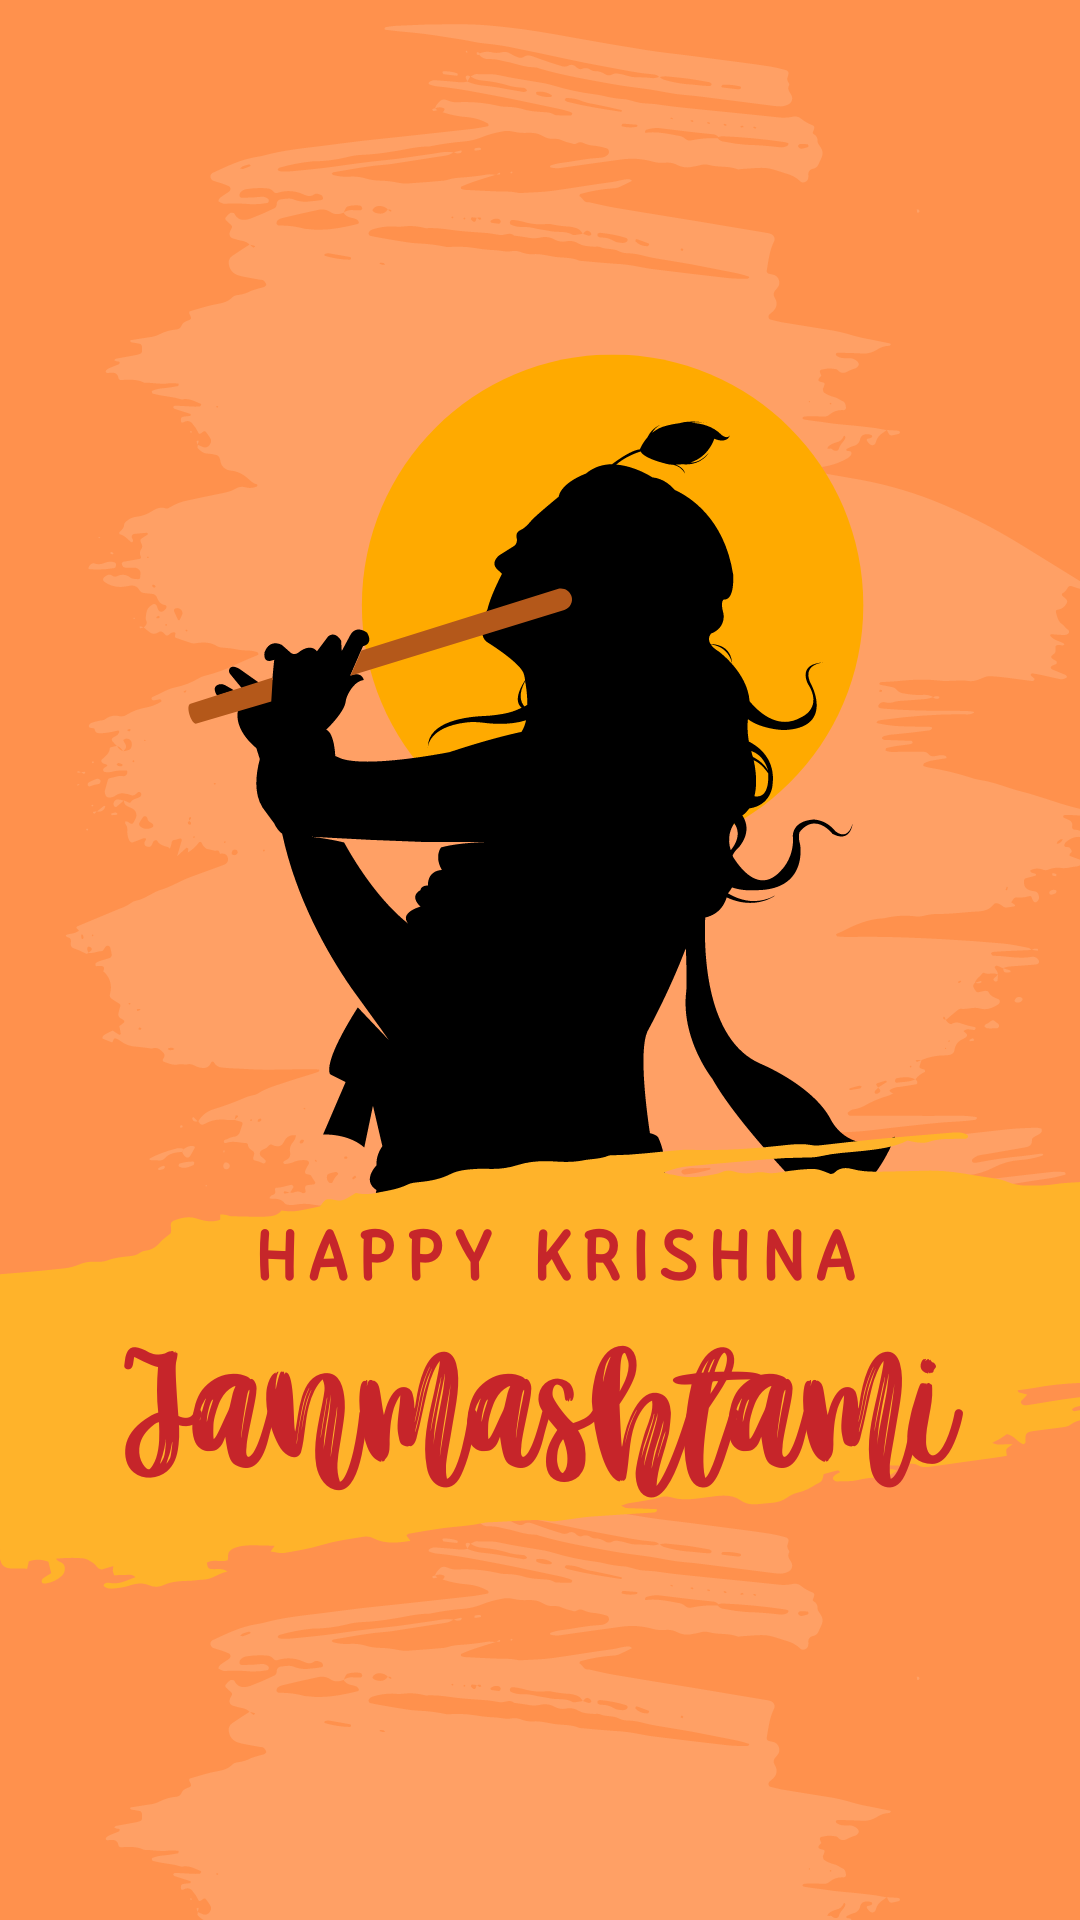 #{"id":1619,"_id":"61f3f785e0f744570541c3c4","name":"krishna-janmashtami","count":1,"data":"{\"_id\":{\"$oid\":\"61f3f785e0f744570541c3c4\"},\"id\":\"891\",\"name\":\"krishna-janmashtami\",\"created_at\":\"2021-08-26-13:32:36\",\"updated_at\":\"2021-08-26-13:32:36\",\"updatedAt\":{\"$date\":\"2022-01-28T14:33:44.933Z\"},\"count\":1}","deleted_at":null,"created_at":"2021-08-26T01:32:36.000000Z","updated_at":"2021-08-26T01:32:36.000000Z","merge_with":null,"pivot":{"taggable_id":2315,"tag_id":1619,"taggable_type":"App\\Models\\Status"}}, #{"id":2489,"_id":null,"name":"lord-krishna","count":0,"data":null,"deleted_at":null,"created_at":"2023-09-04T09:55:55.000000Z","updated_at":"2023-09-04T09:55:55.000000Z","merge_with":null,"pivot":{"taggable_id":2315,"tag_id":2489,"taggable_type":"App\\Models\\Status"}}, #{"id":2484,"_id":null,"name":"janmashtami--quotes","count":0,"data":null,"deleted_at":null,"created_at":"2023-09-04T09:38:20.000000Z","updated_at":"2023-09-04T09:38:20.000000Z","merge_with":null,"pivot":{"taggable_id":2315,"tag_id":2484,"taggable_type":"App\\Models\\Status"}}, #{"id":2485,"_id":null,"name":"janmashtami--status","count":0,"data":null,"deleted_at":null,"created_at":"2023-09-04T09:38:20.000000Z","updated_at":"2023-09-04T09:38:20.000000Z","merge_with":null,"pivot":{"taggable_id":2315,"tag_id":2485,"taggable_type":"App\\Models\\Status"}}, #{"id":2488,"_id":null,"name":"janmashtami-wishes","count":0,"data":null,"deleted_at":null,"created_at":"2023-09-04T09:42:29.000000Z","updated_at":"2023-09-04T09:42:29.000000Z","merge_with":null,"pivot":{"taggable_id":2315,"tag_id":2488,"taggable_type":"App\\Models\\Status"}}, #{"id":2491,"_id":null,"name":"jai-shri-krishna","count":0,"data":null,"deleted_at":null,"created_at":"2023-09-04T09:57:21.000000Z","updated_at":"2023-09-04T09:57:21.000000Z","merge_with":null,"pivot":{"taggable_id":2315,"tag_id":2491,"taggable_type":"App\\Models\\Status"}}